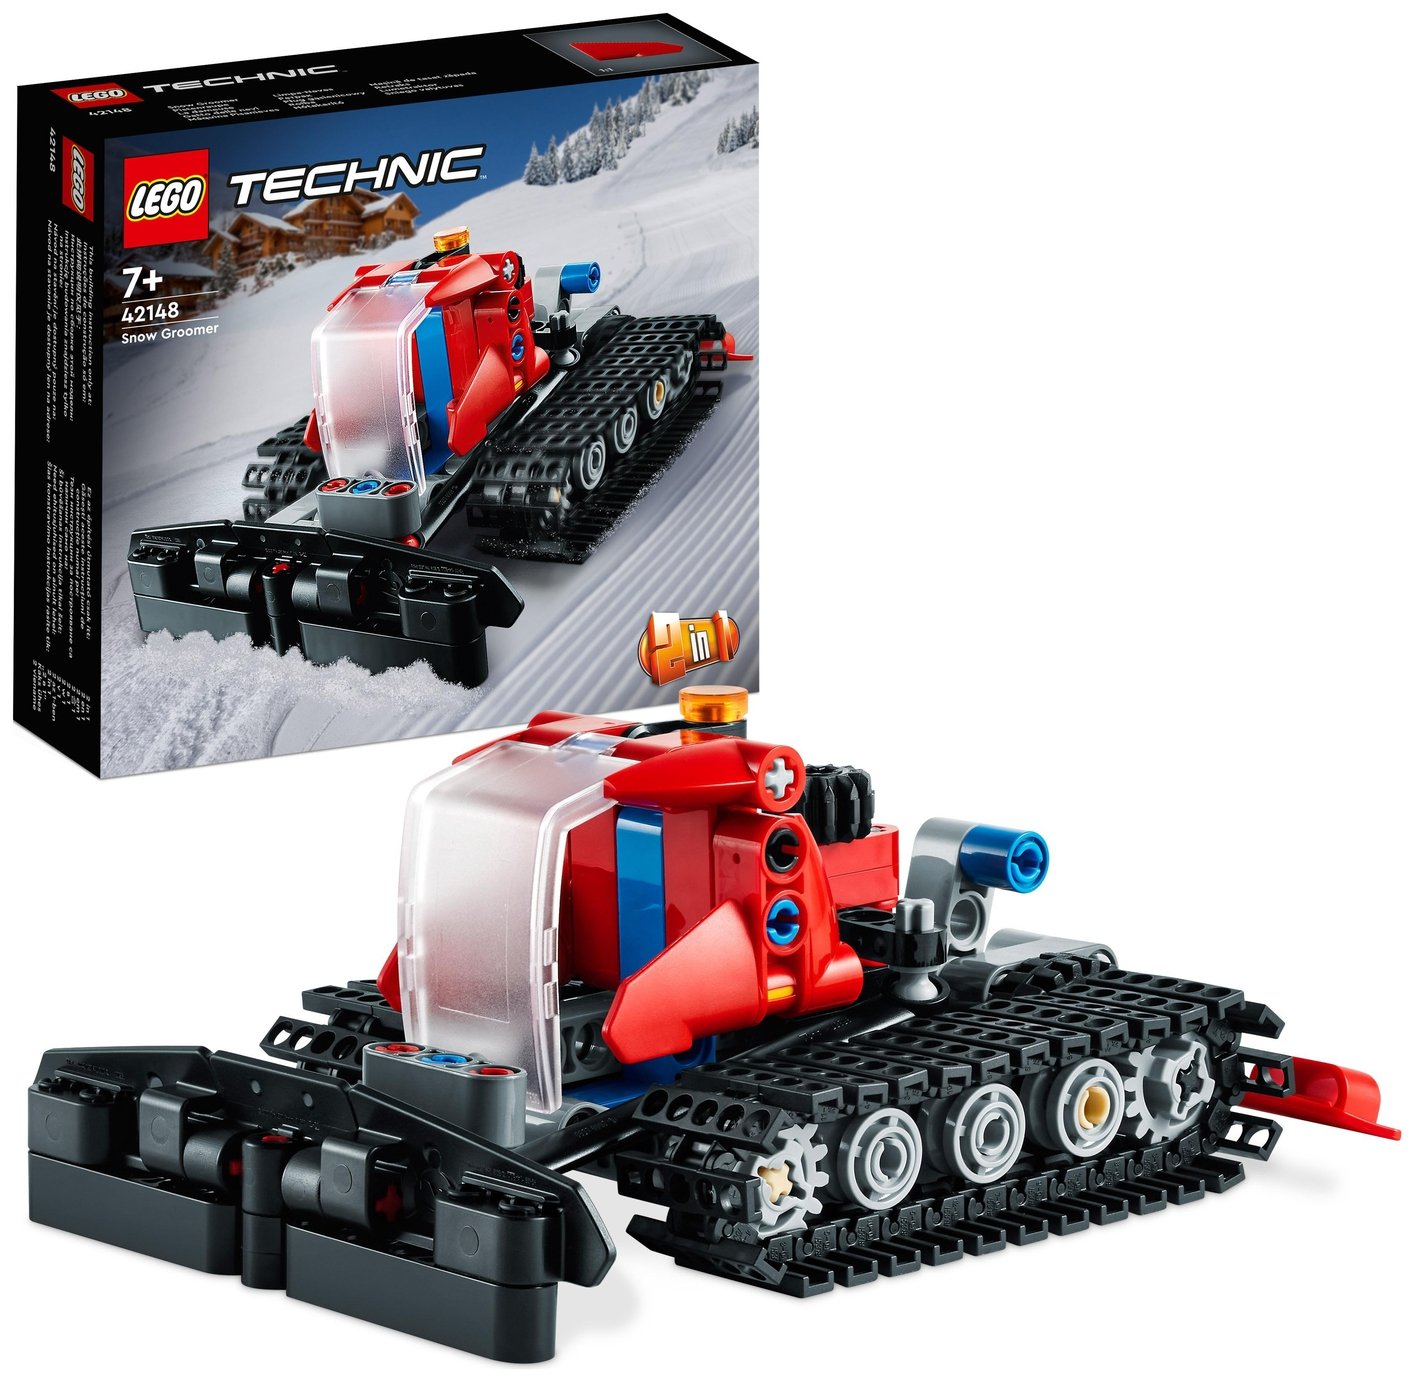 LEGO Technic Snow Groomer 2in1 Vehicle Snowmobile Set 42148 review